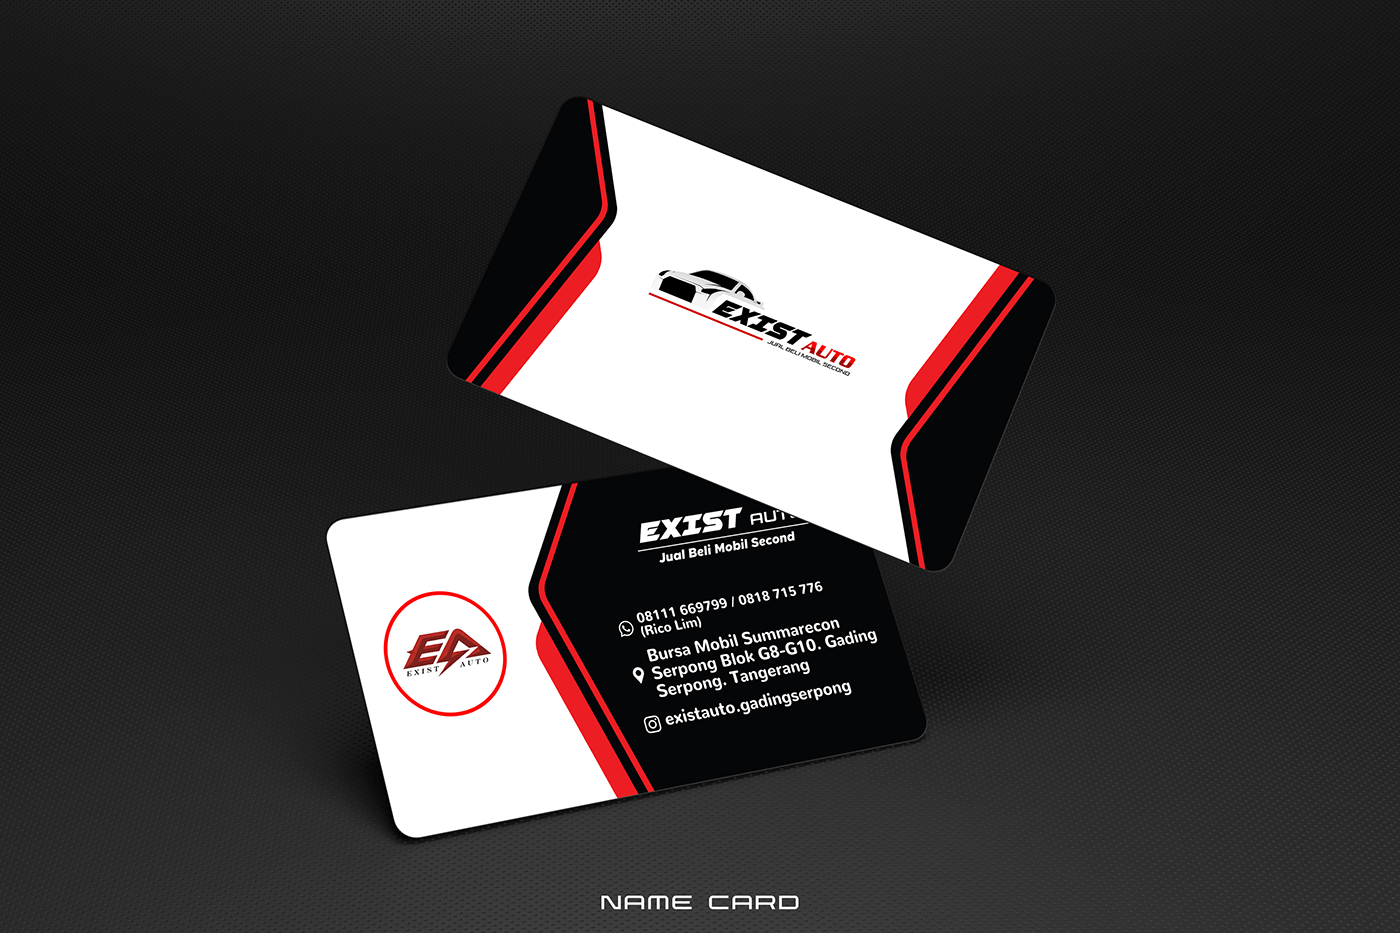 Name card business brand identity Travel adventure plane car Vehicle Fly relation